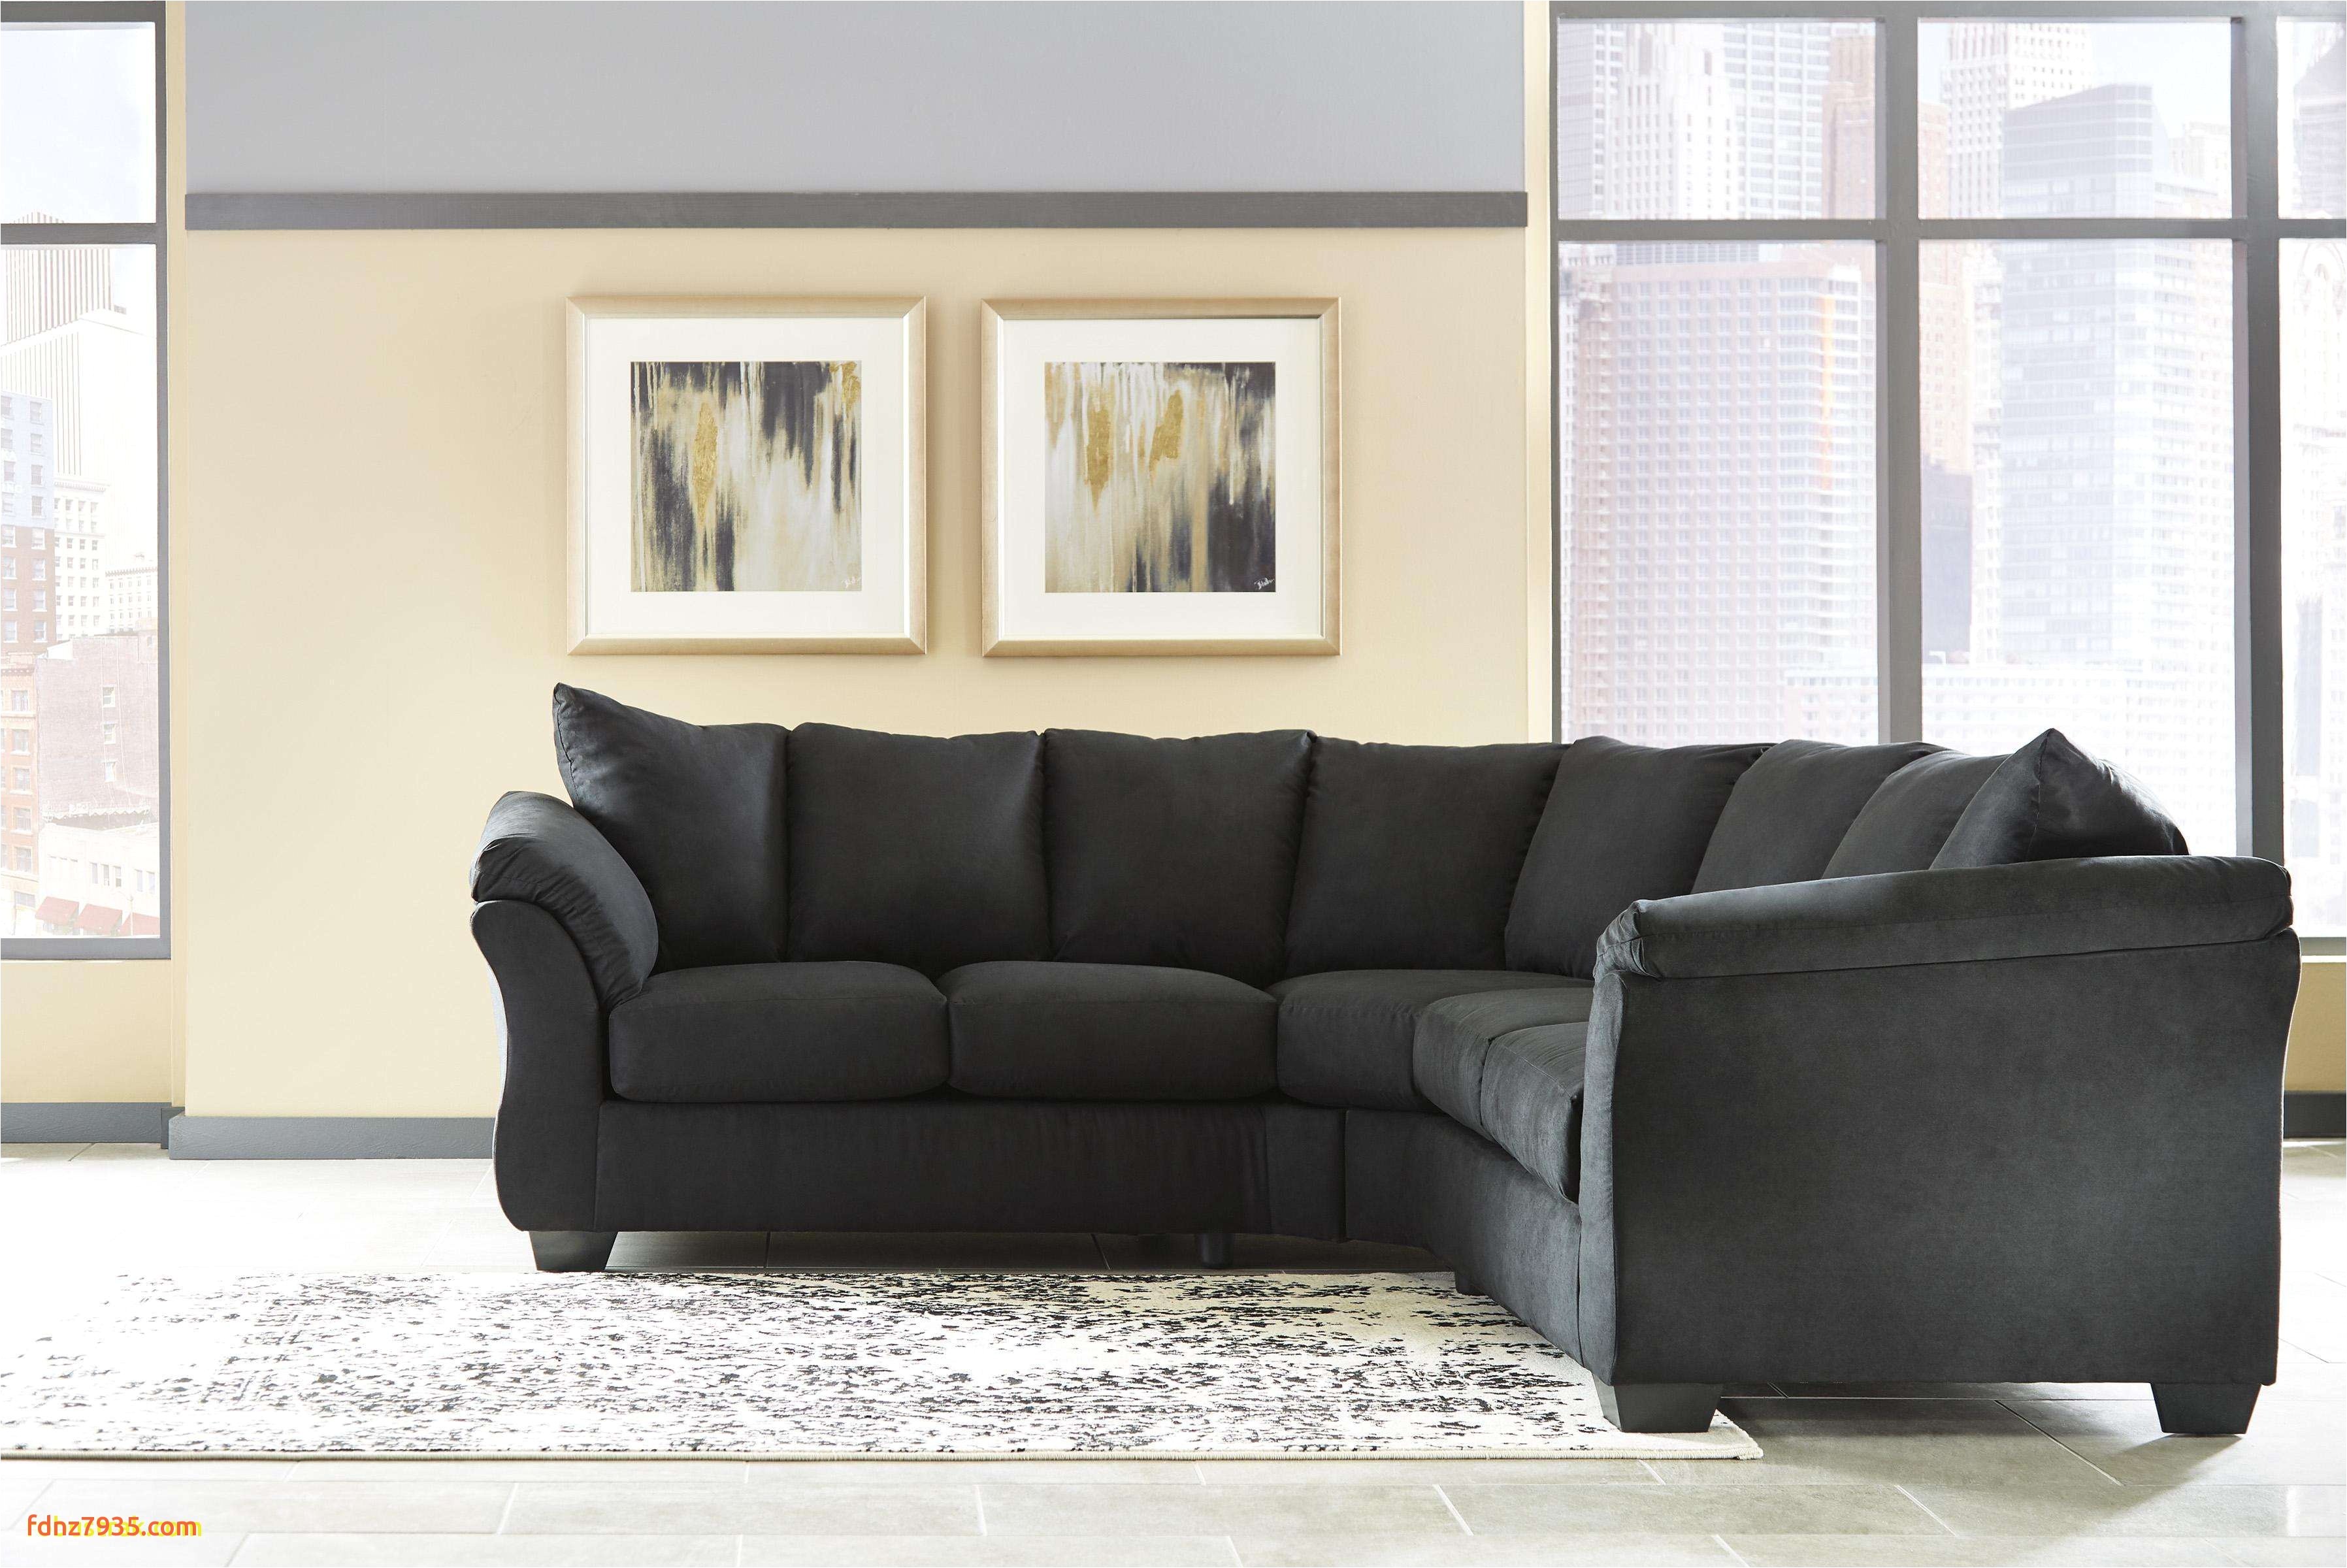 Leather Sectional sofa for Small Spaces Sectional sofas for Small Spaces Fresh sofa Design